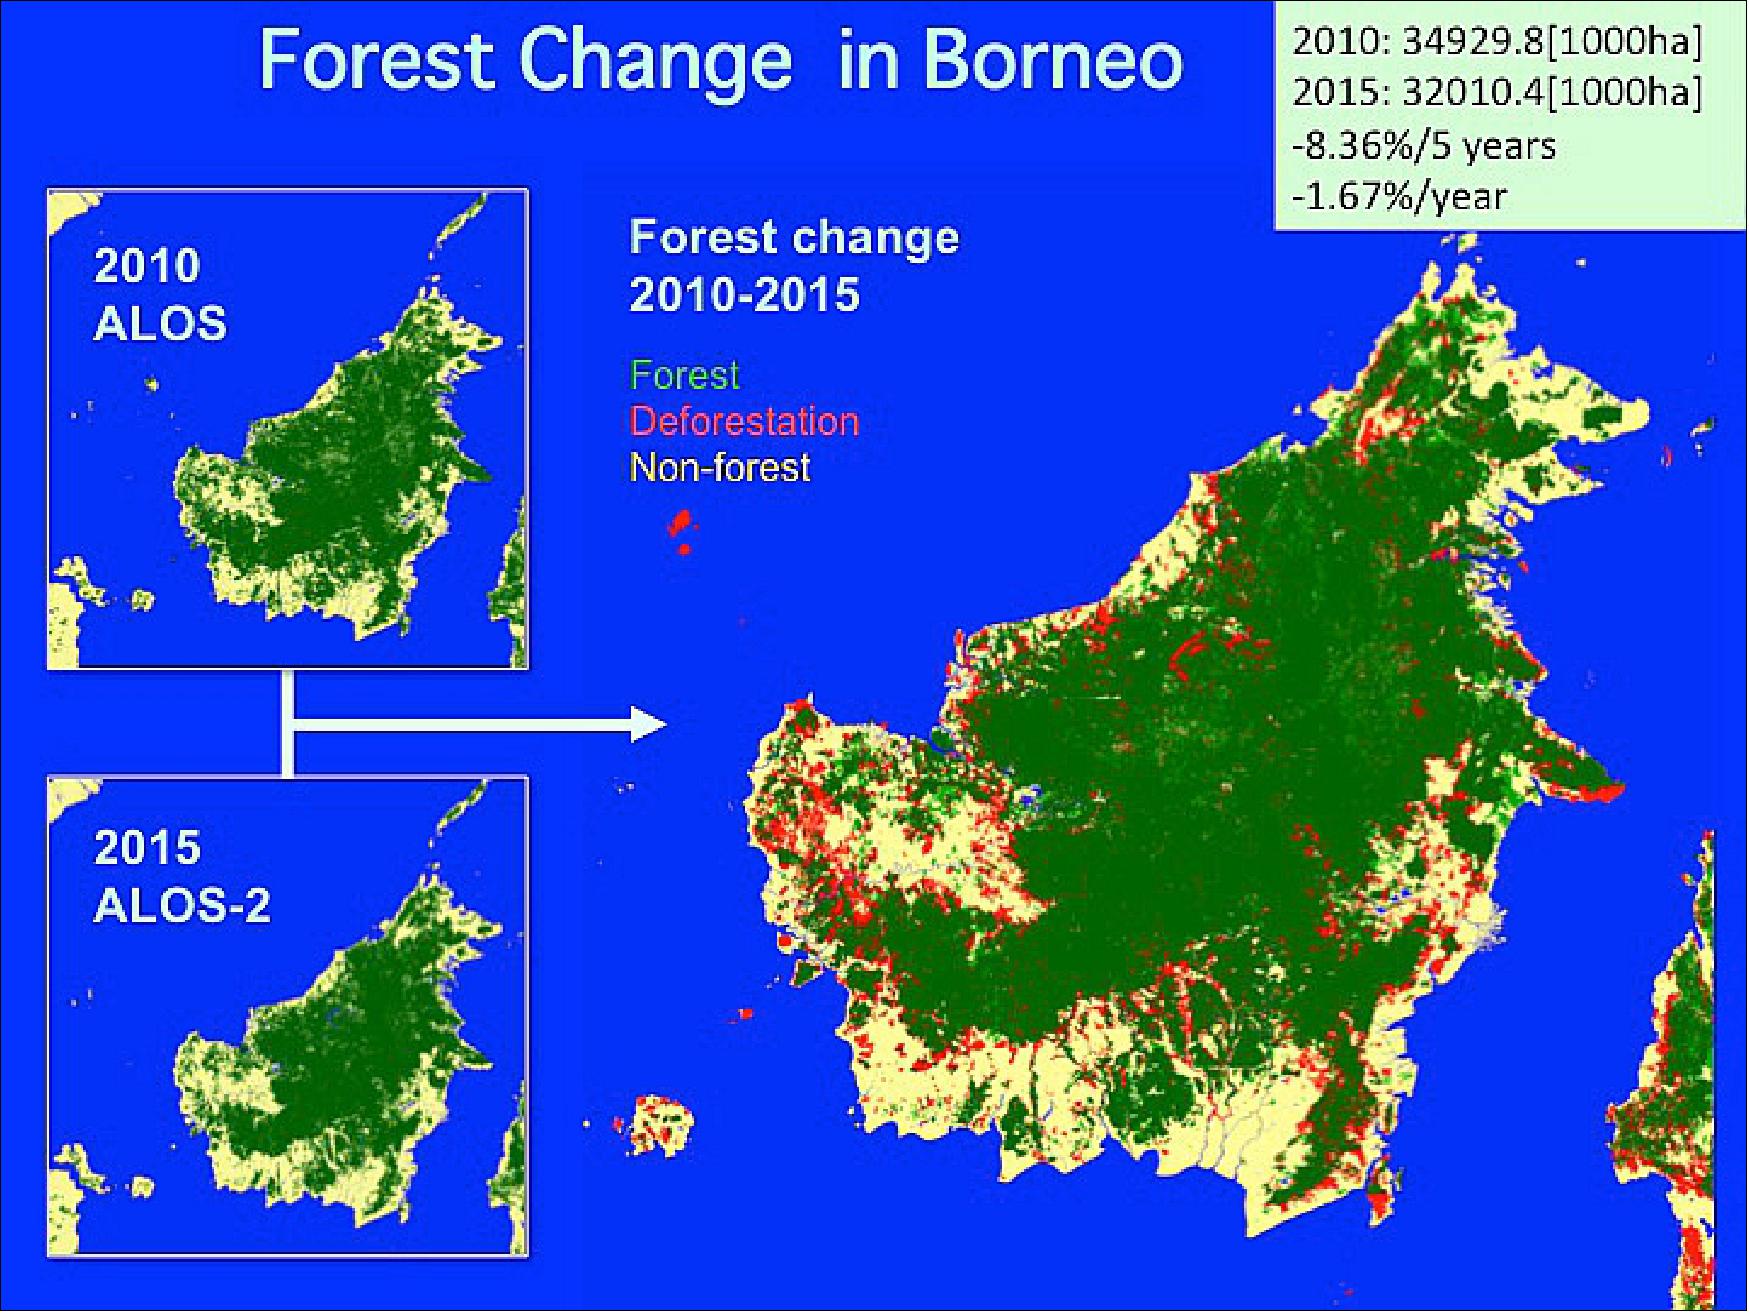 Figure 41: Deforestation on Borneo Island observed between 2010 and 2015 based on observations by synthetic aperture radars on the DAICHI and DAICHI-2 (image credit: JAXA)